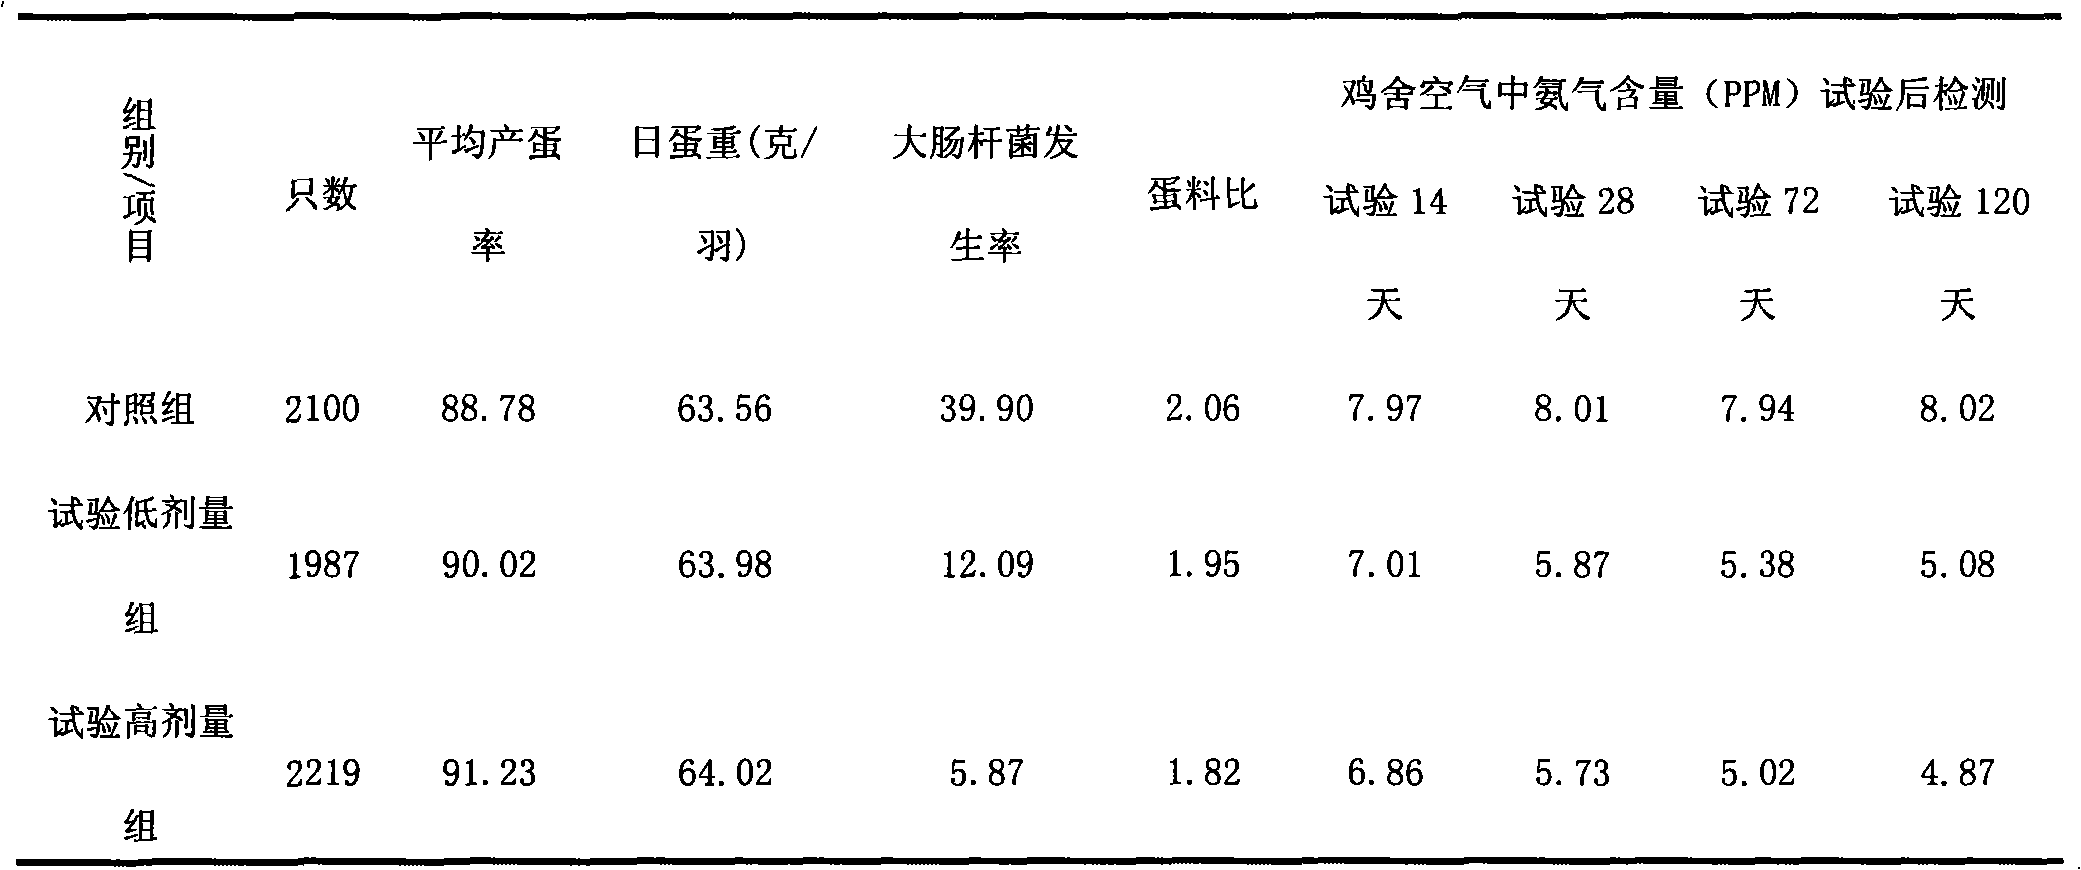 Surroundings improvement composite functional additive special for livestock and poultry, preparation and application thereof